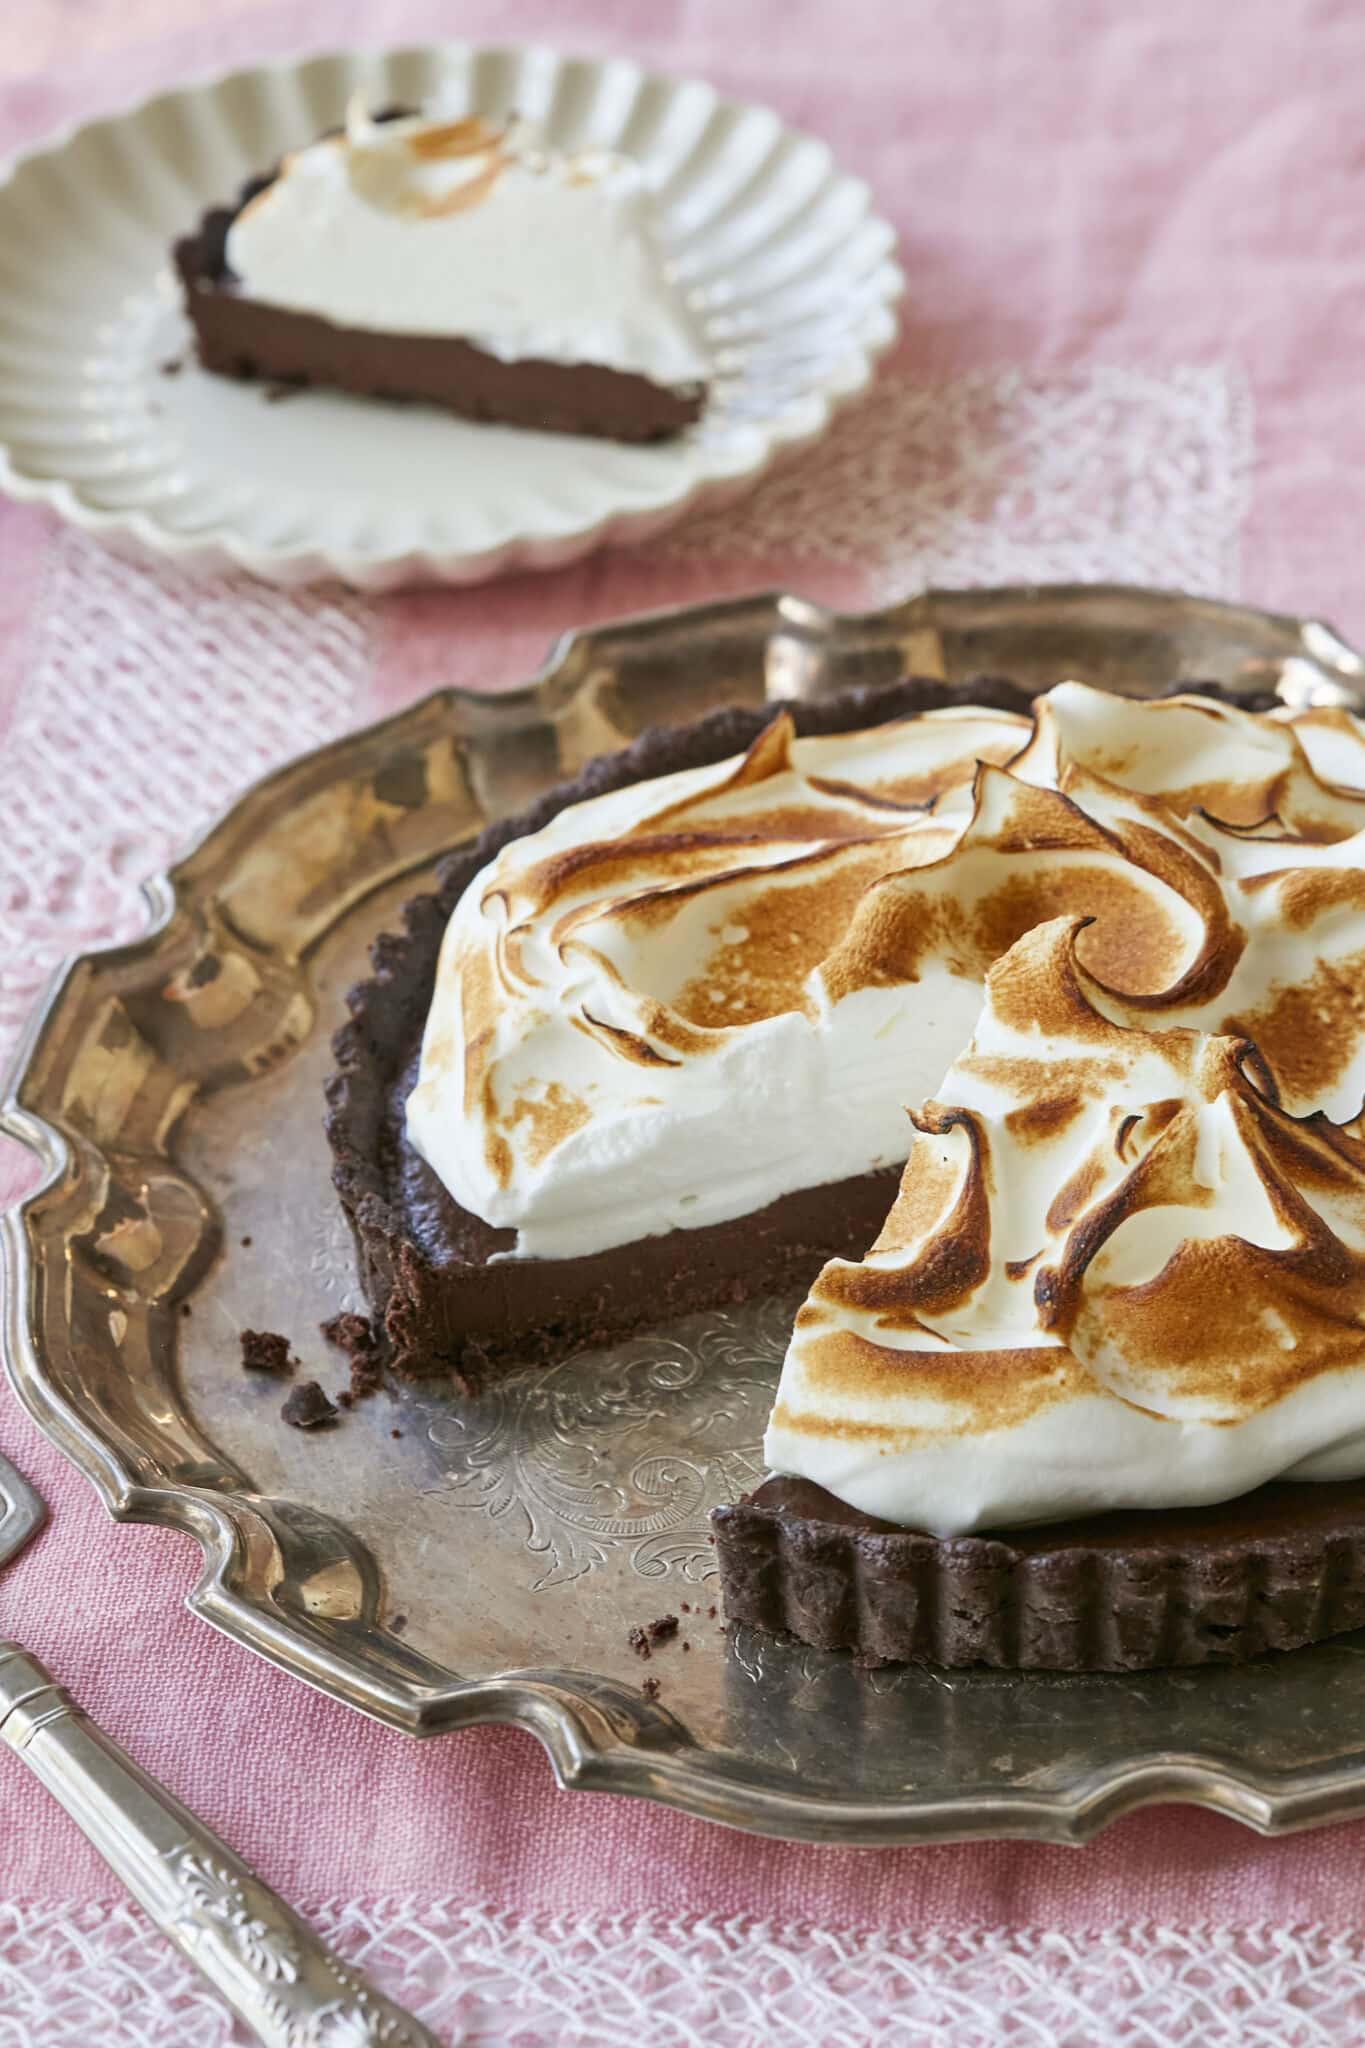 Irresistible Whiskey Chocolate Meringue Tart is served on a silver platter. It has decadent chocolate crust, rich and smooth chocolate filling, topped with velvety toasted meringue. A slice is cut and slice is cut and served on a white dresser plate. 